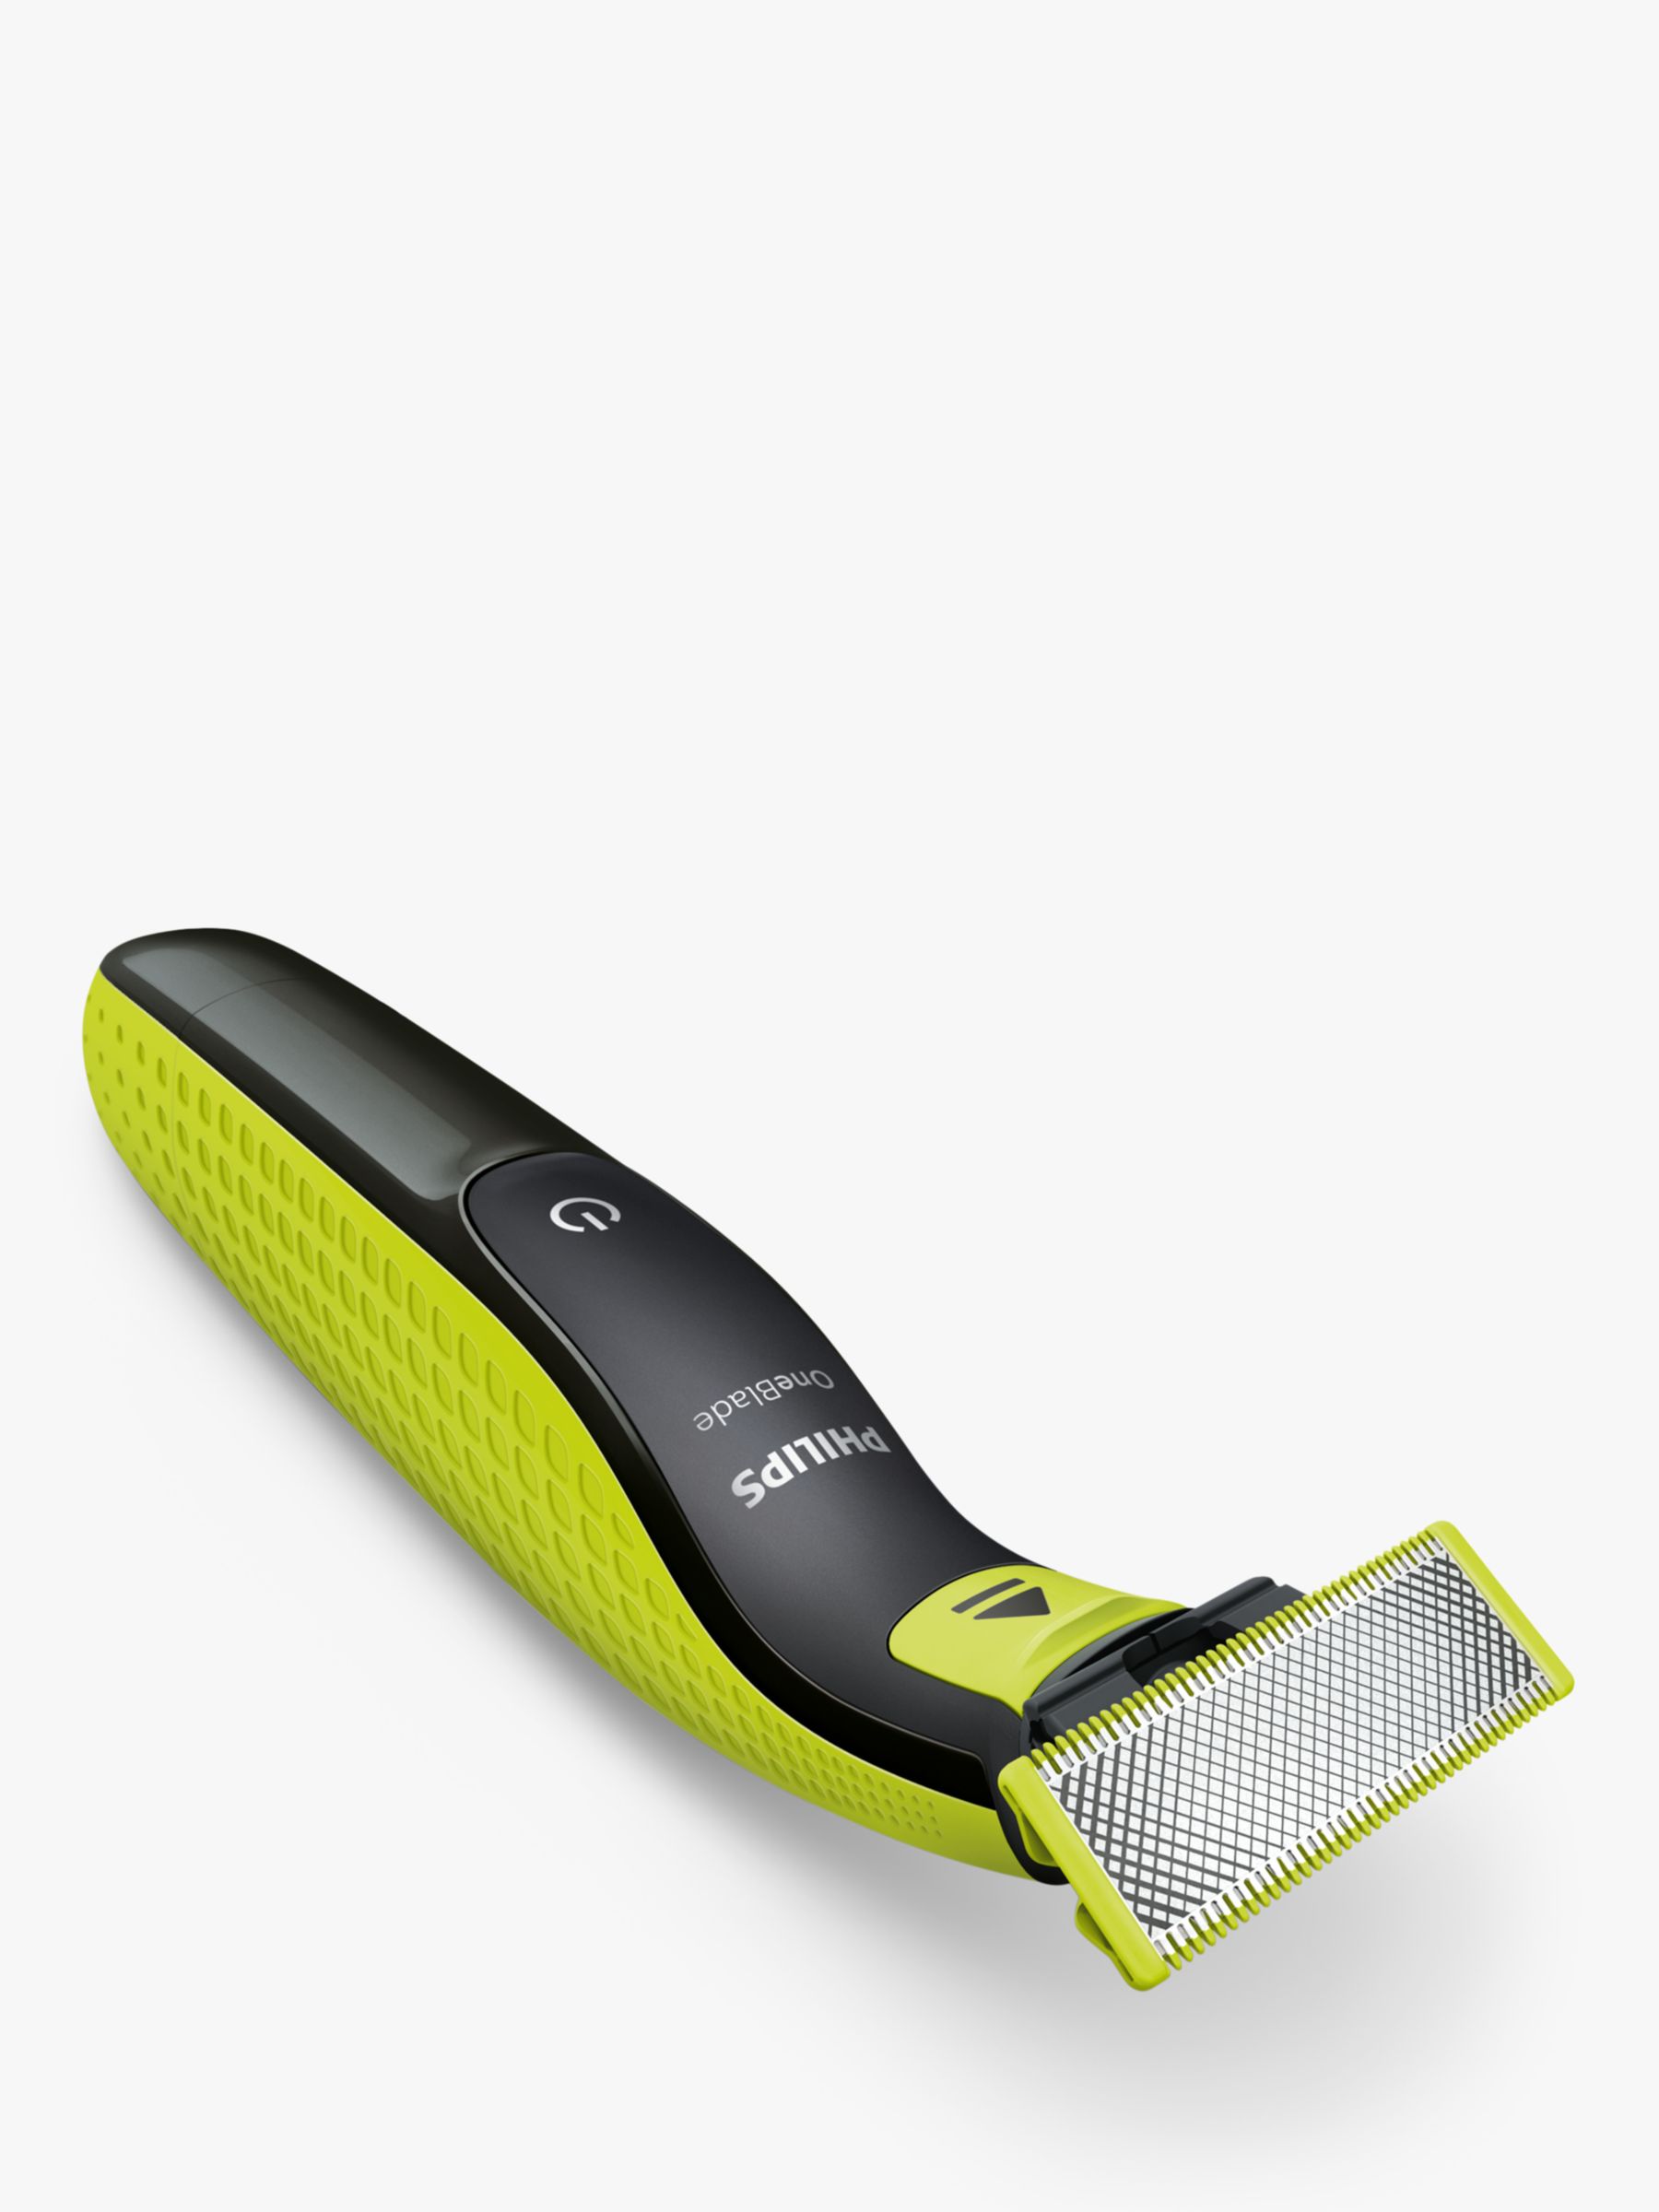 philips one blade wet or dry